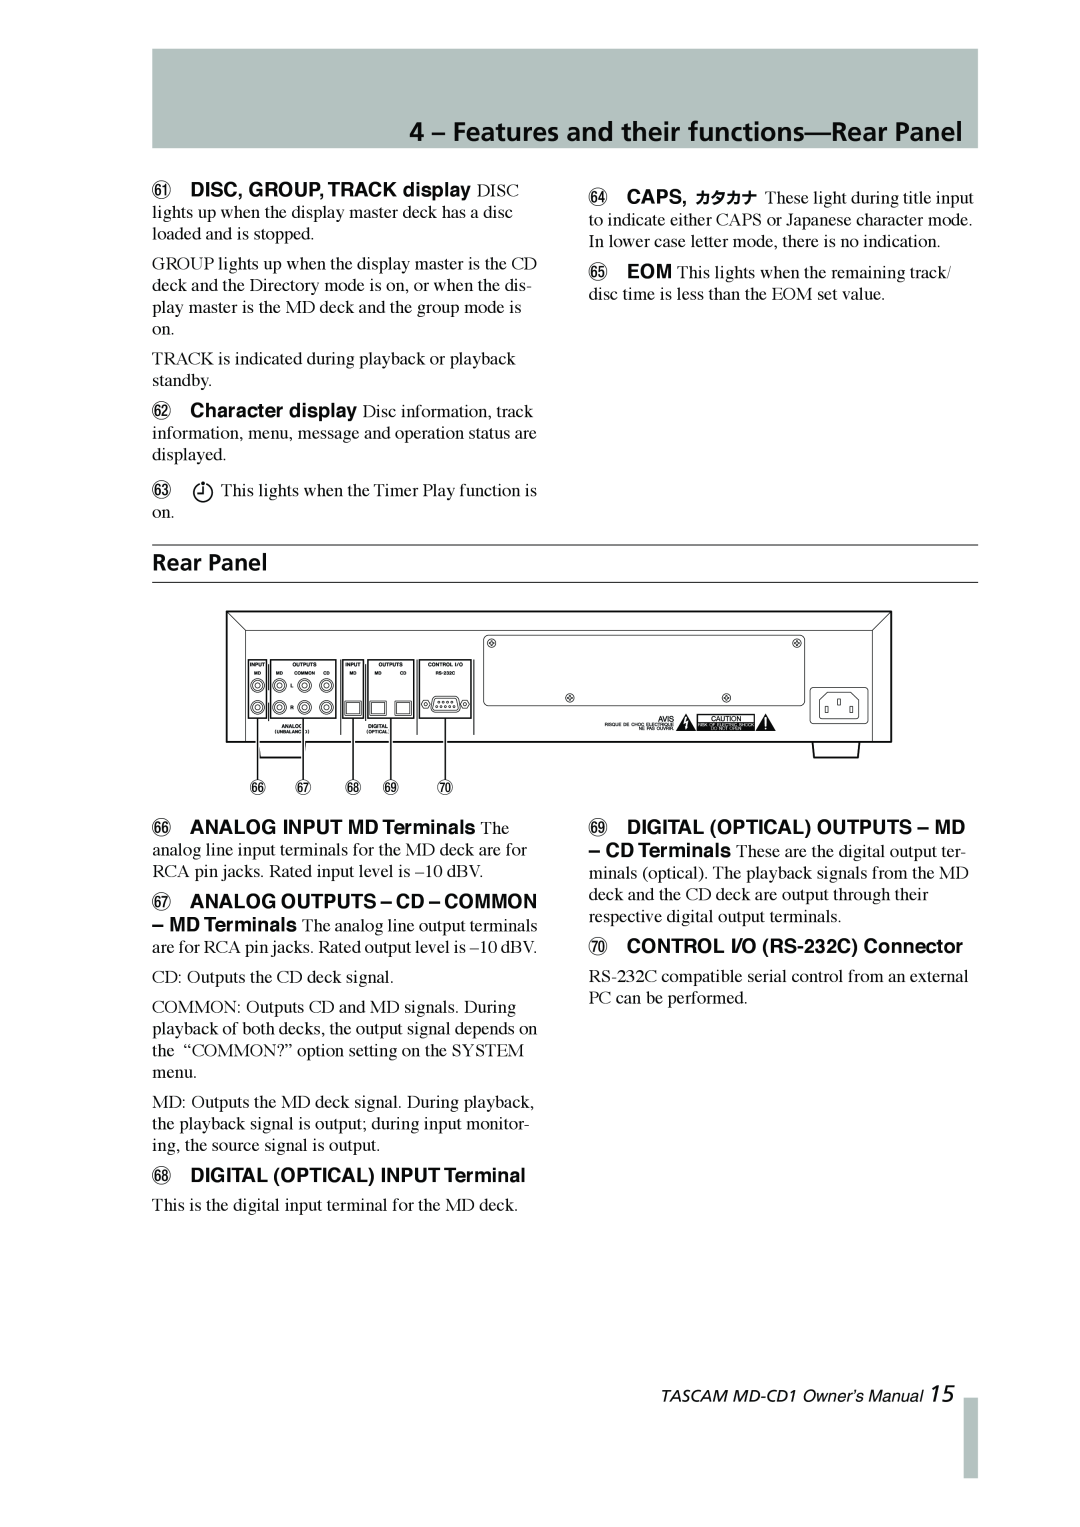 Tascam MD-CD1 owner manual Features and their functions-RearPanel, Rear Panel, 6ANALOG OUTPUTS - CD - COMMON 